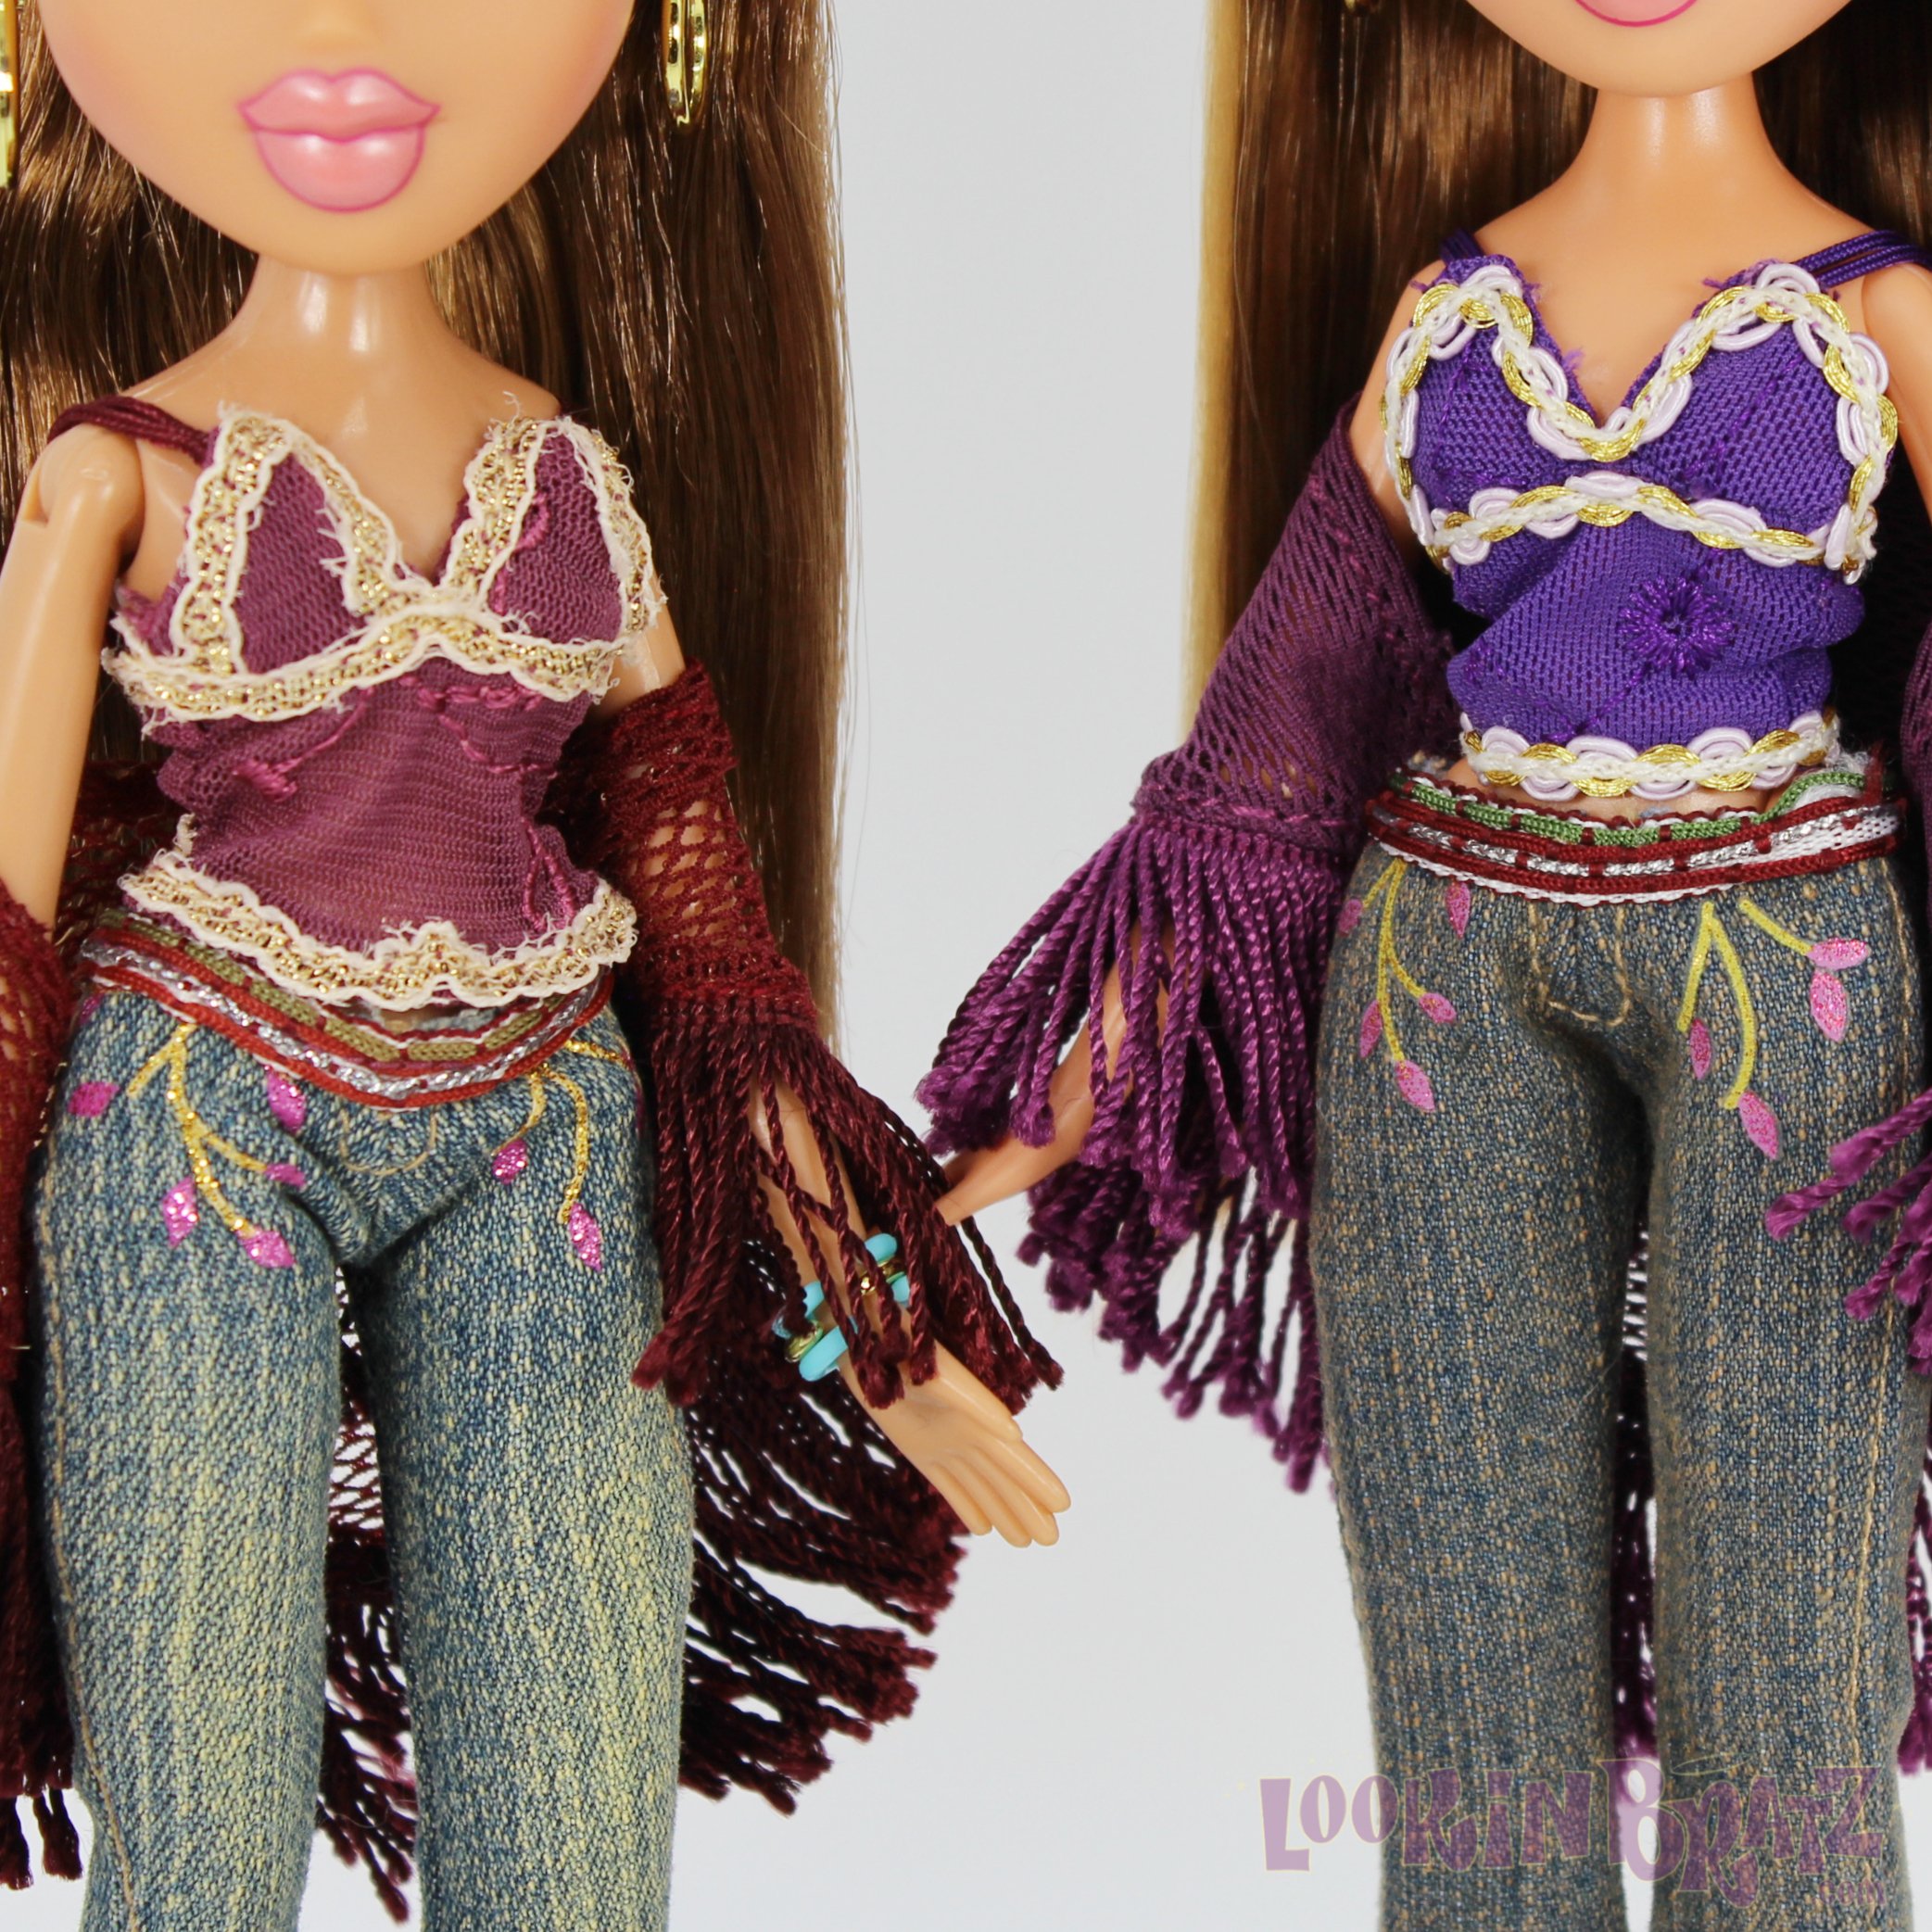 Bratz Funk Out! (2004) and Series 3 Fianna Outfits